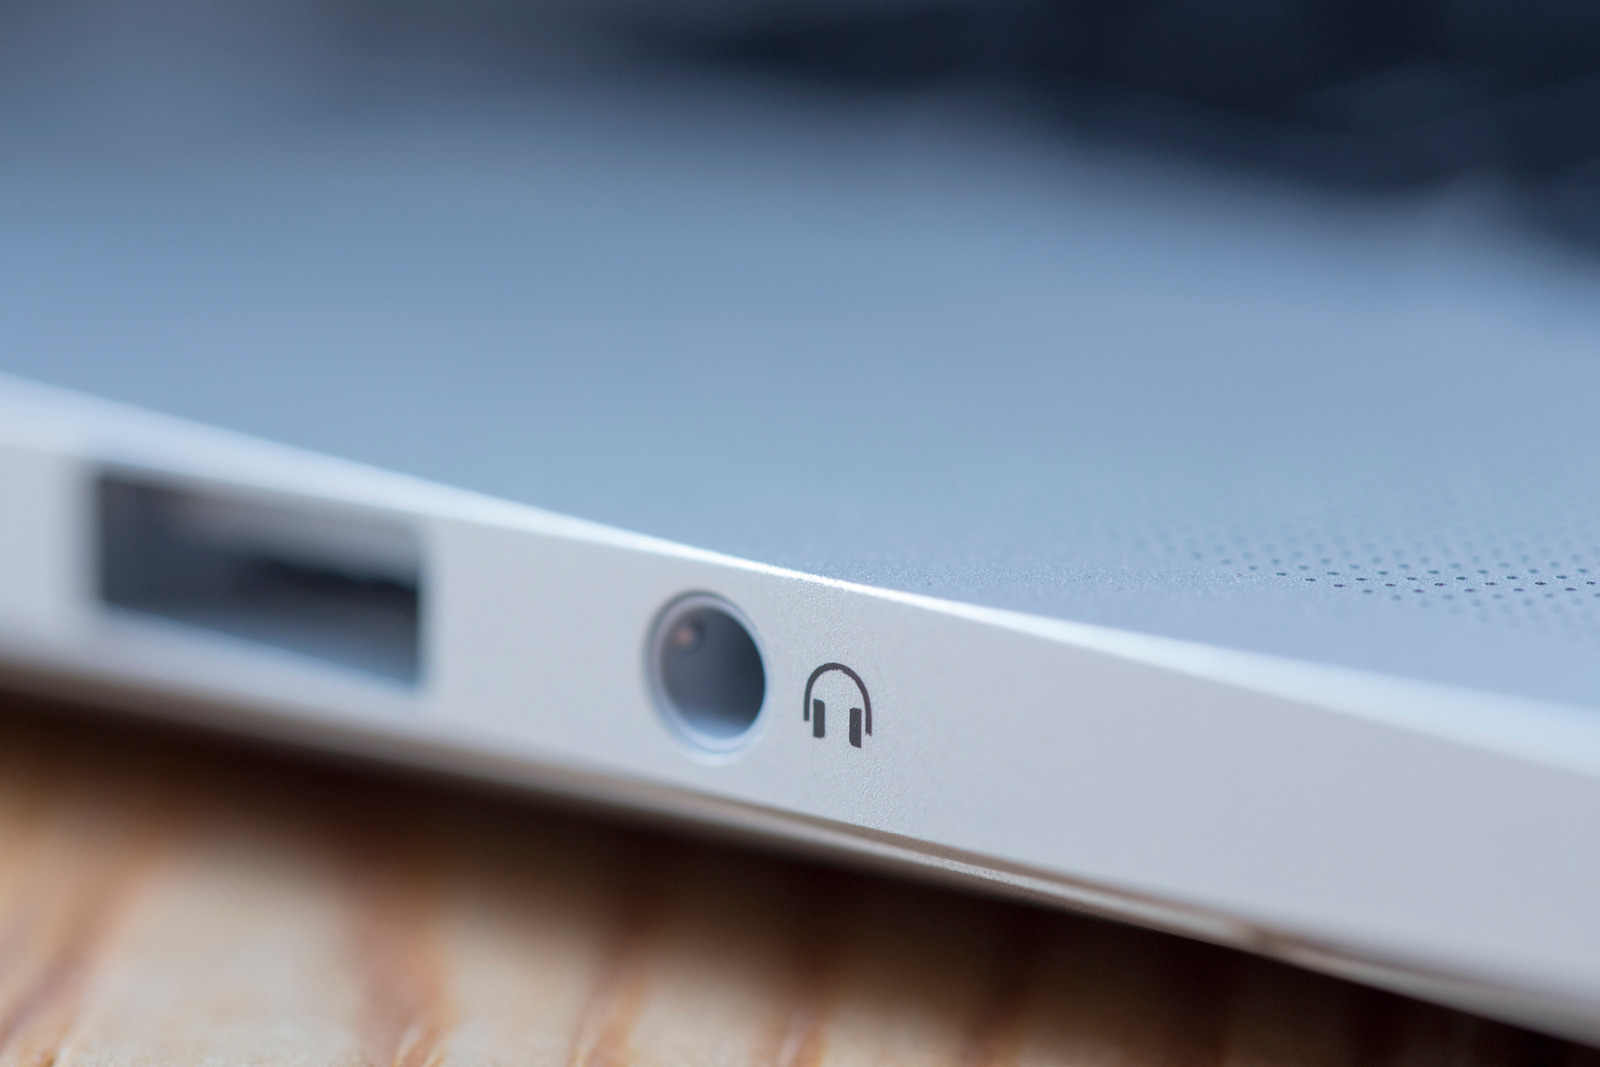 Shot of a headphone port on the side of a laptop. The headphone logo is in focus while the rest is blurred out.